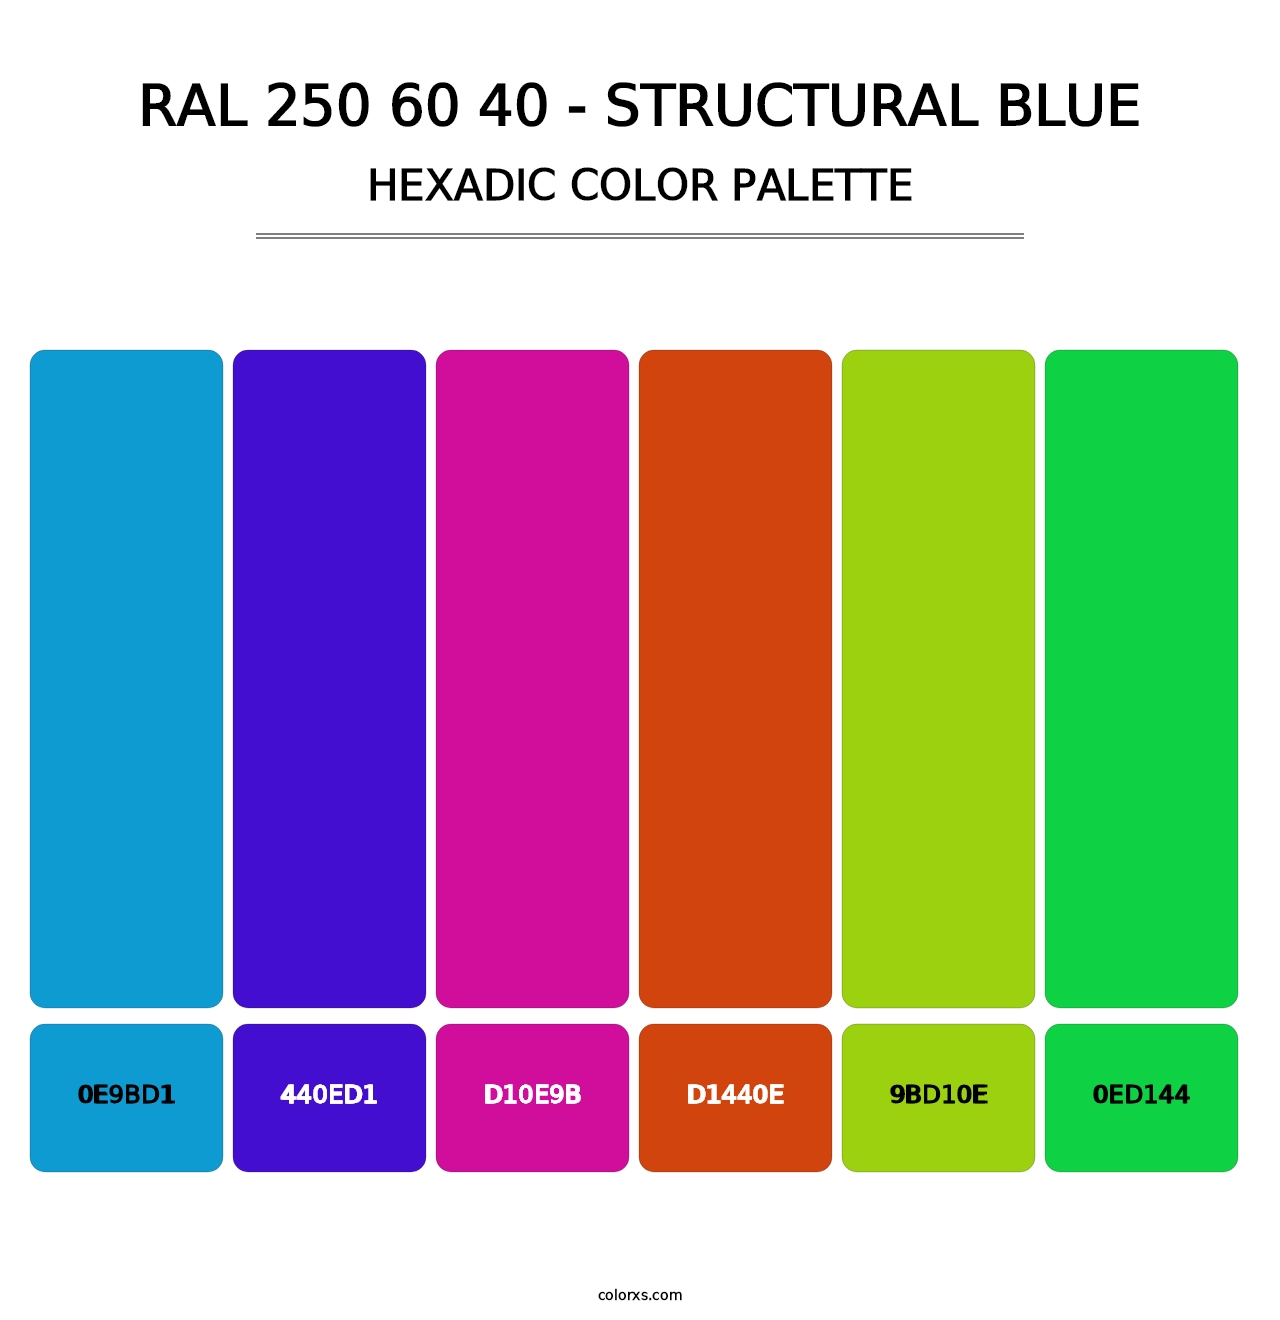 RAL 250 60 40 - Structural Blue - Hexadic Color Palette